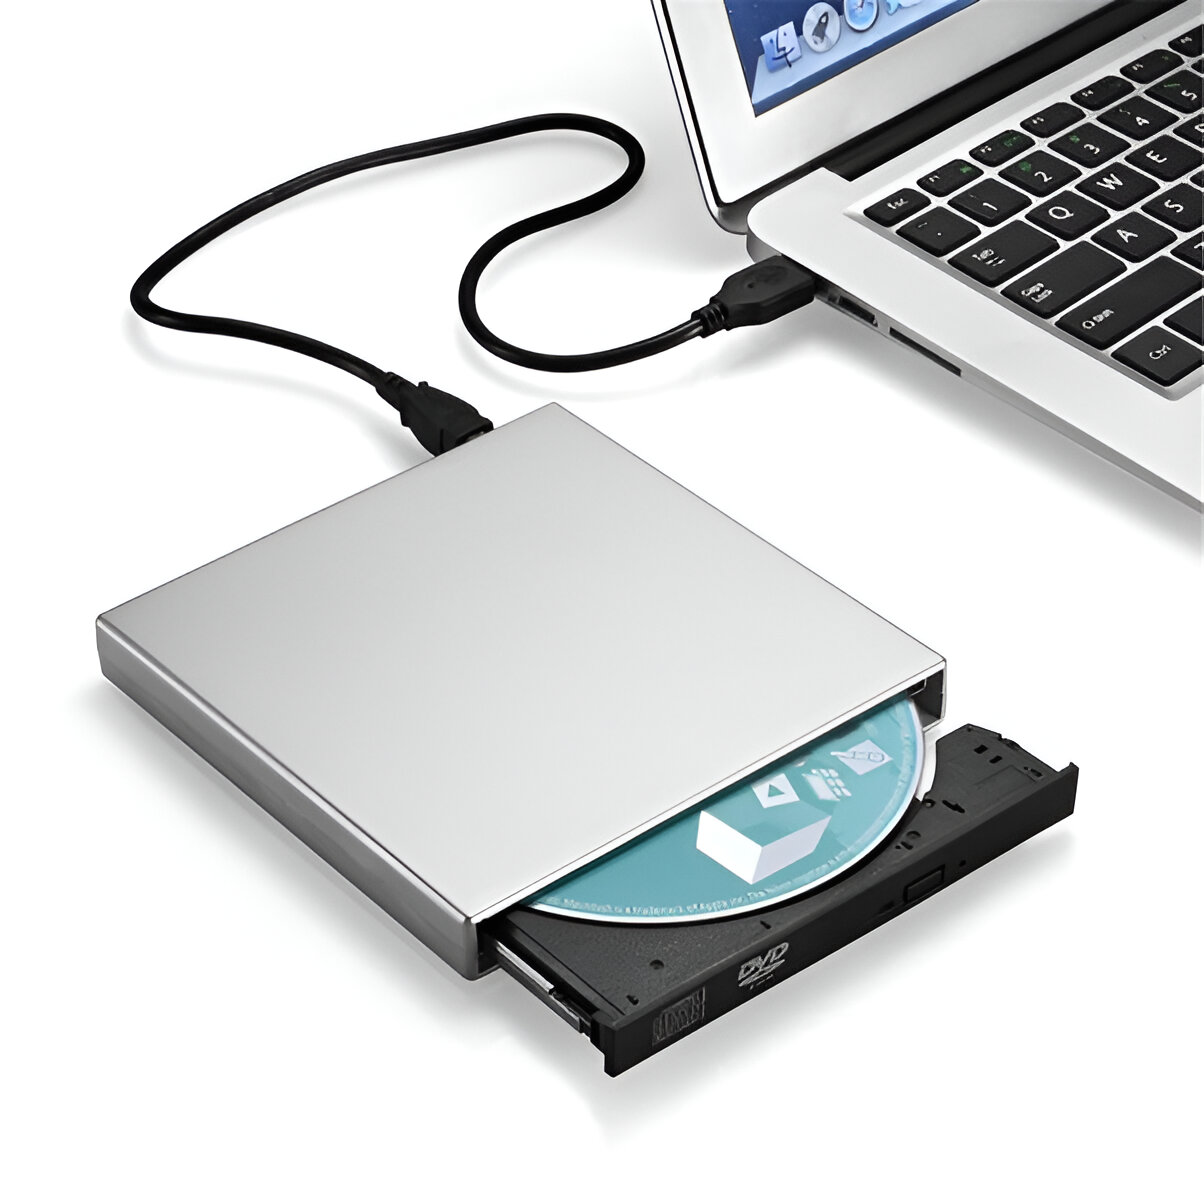 How To Play CD/DVD Using CD/DVD Player On HP Ultrabook